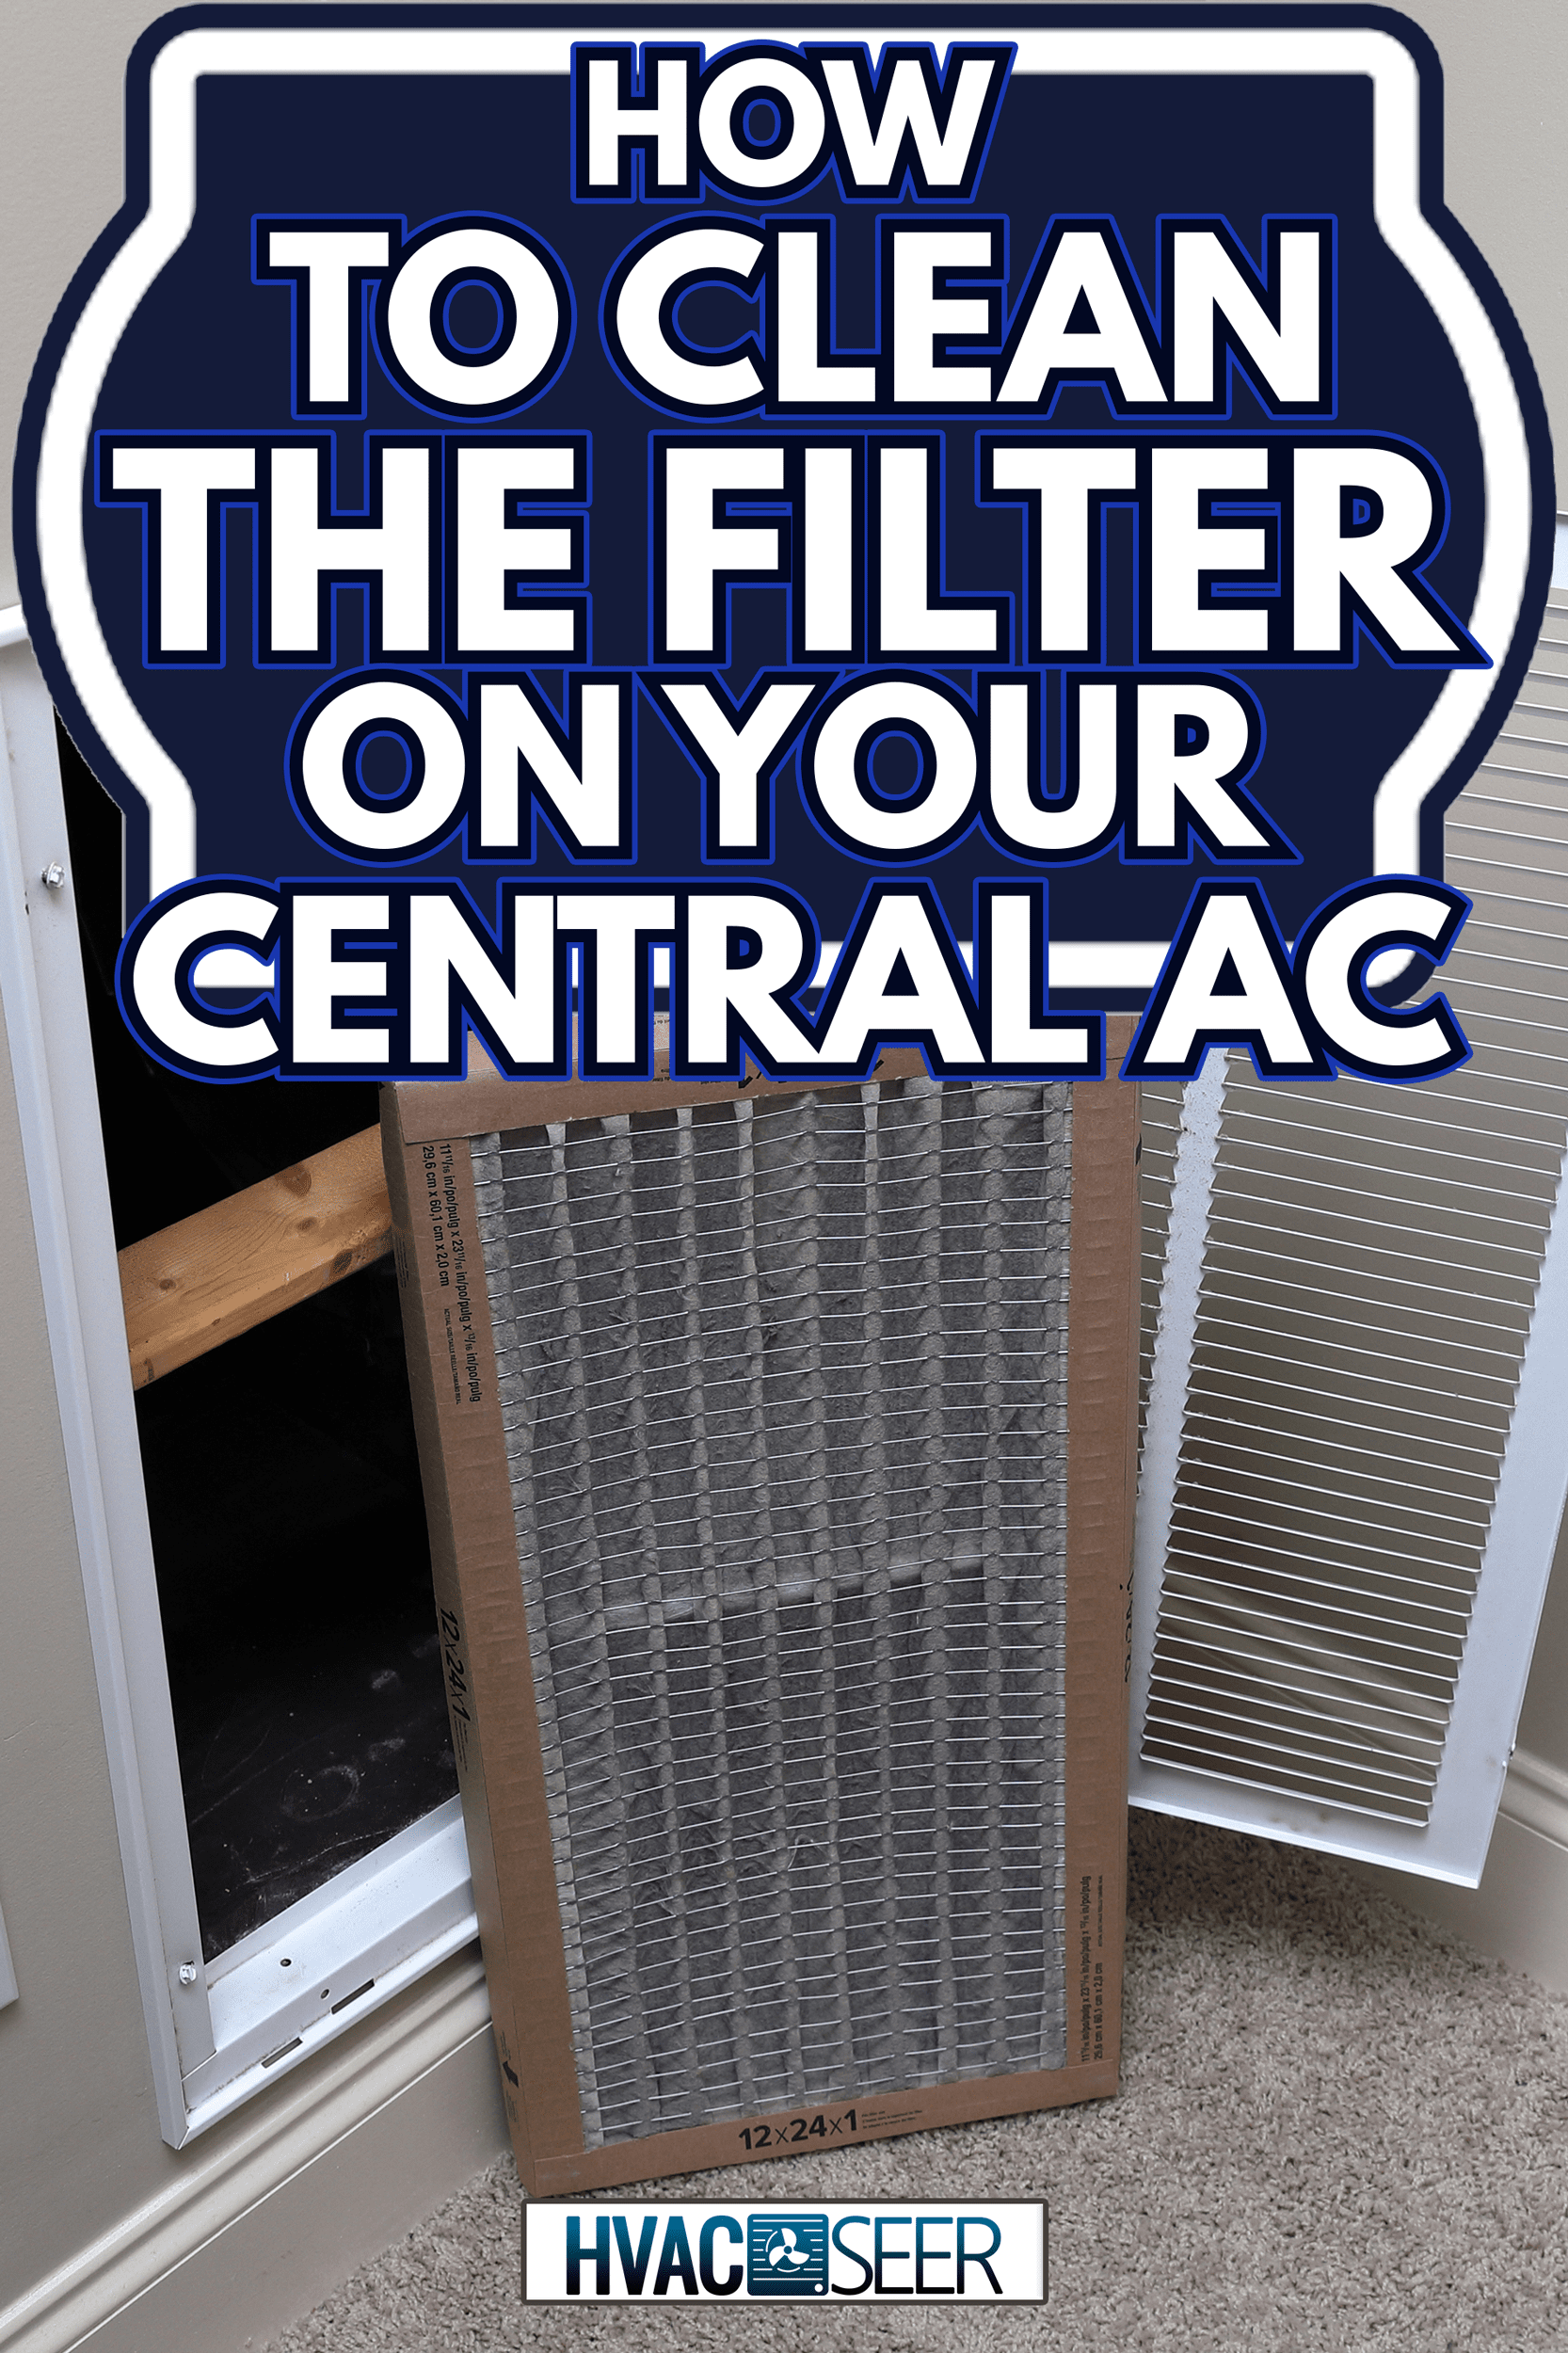 Removing Dirty Air filter for home central air conditioning system - How To Clean The Filter On Your Central AC